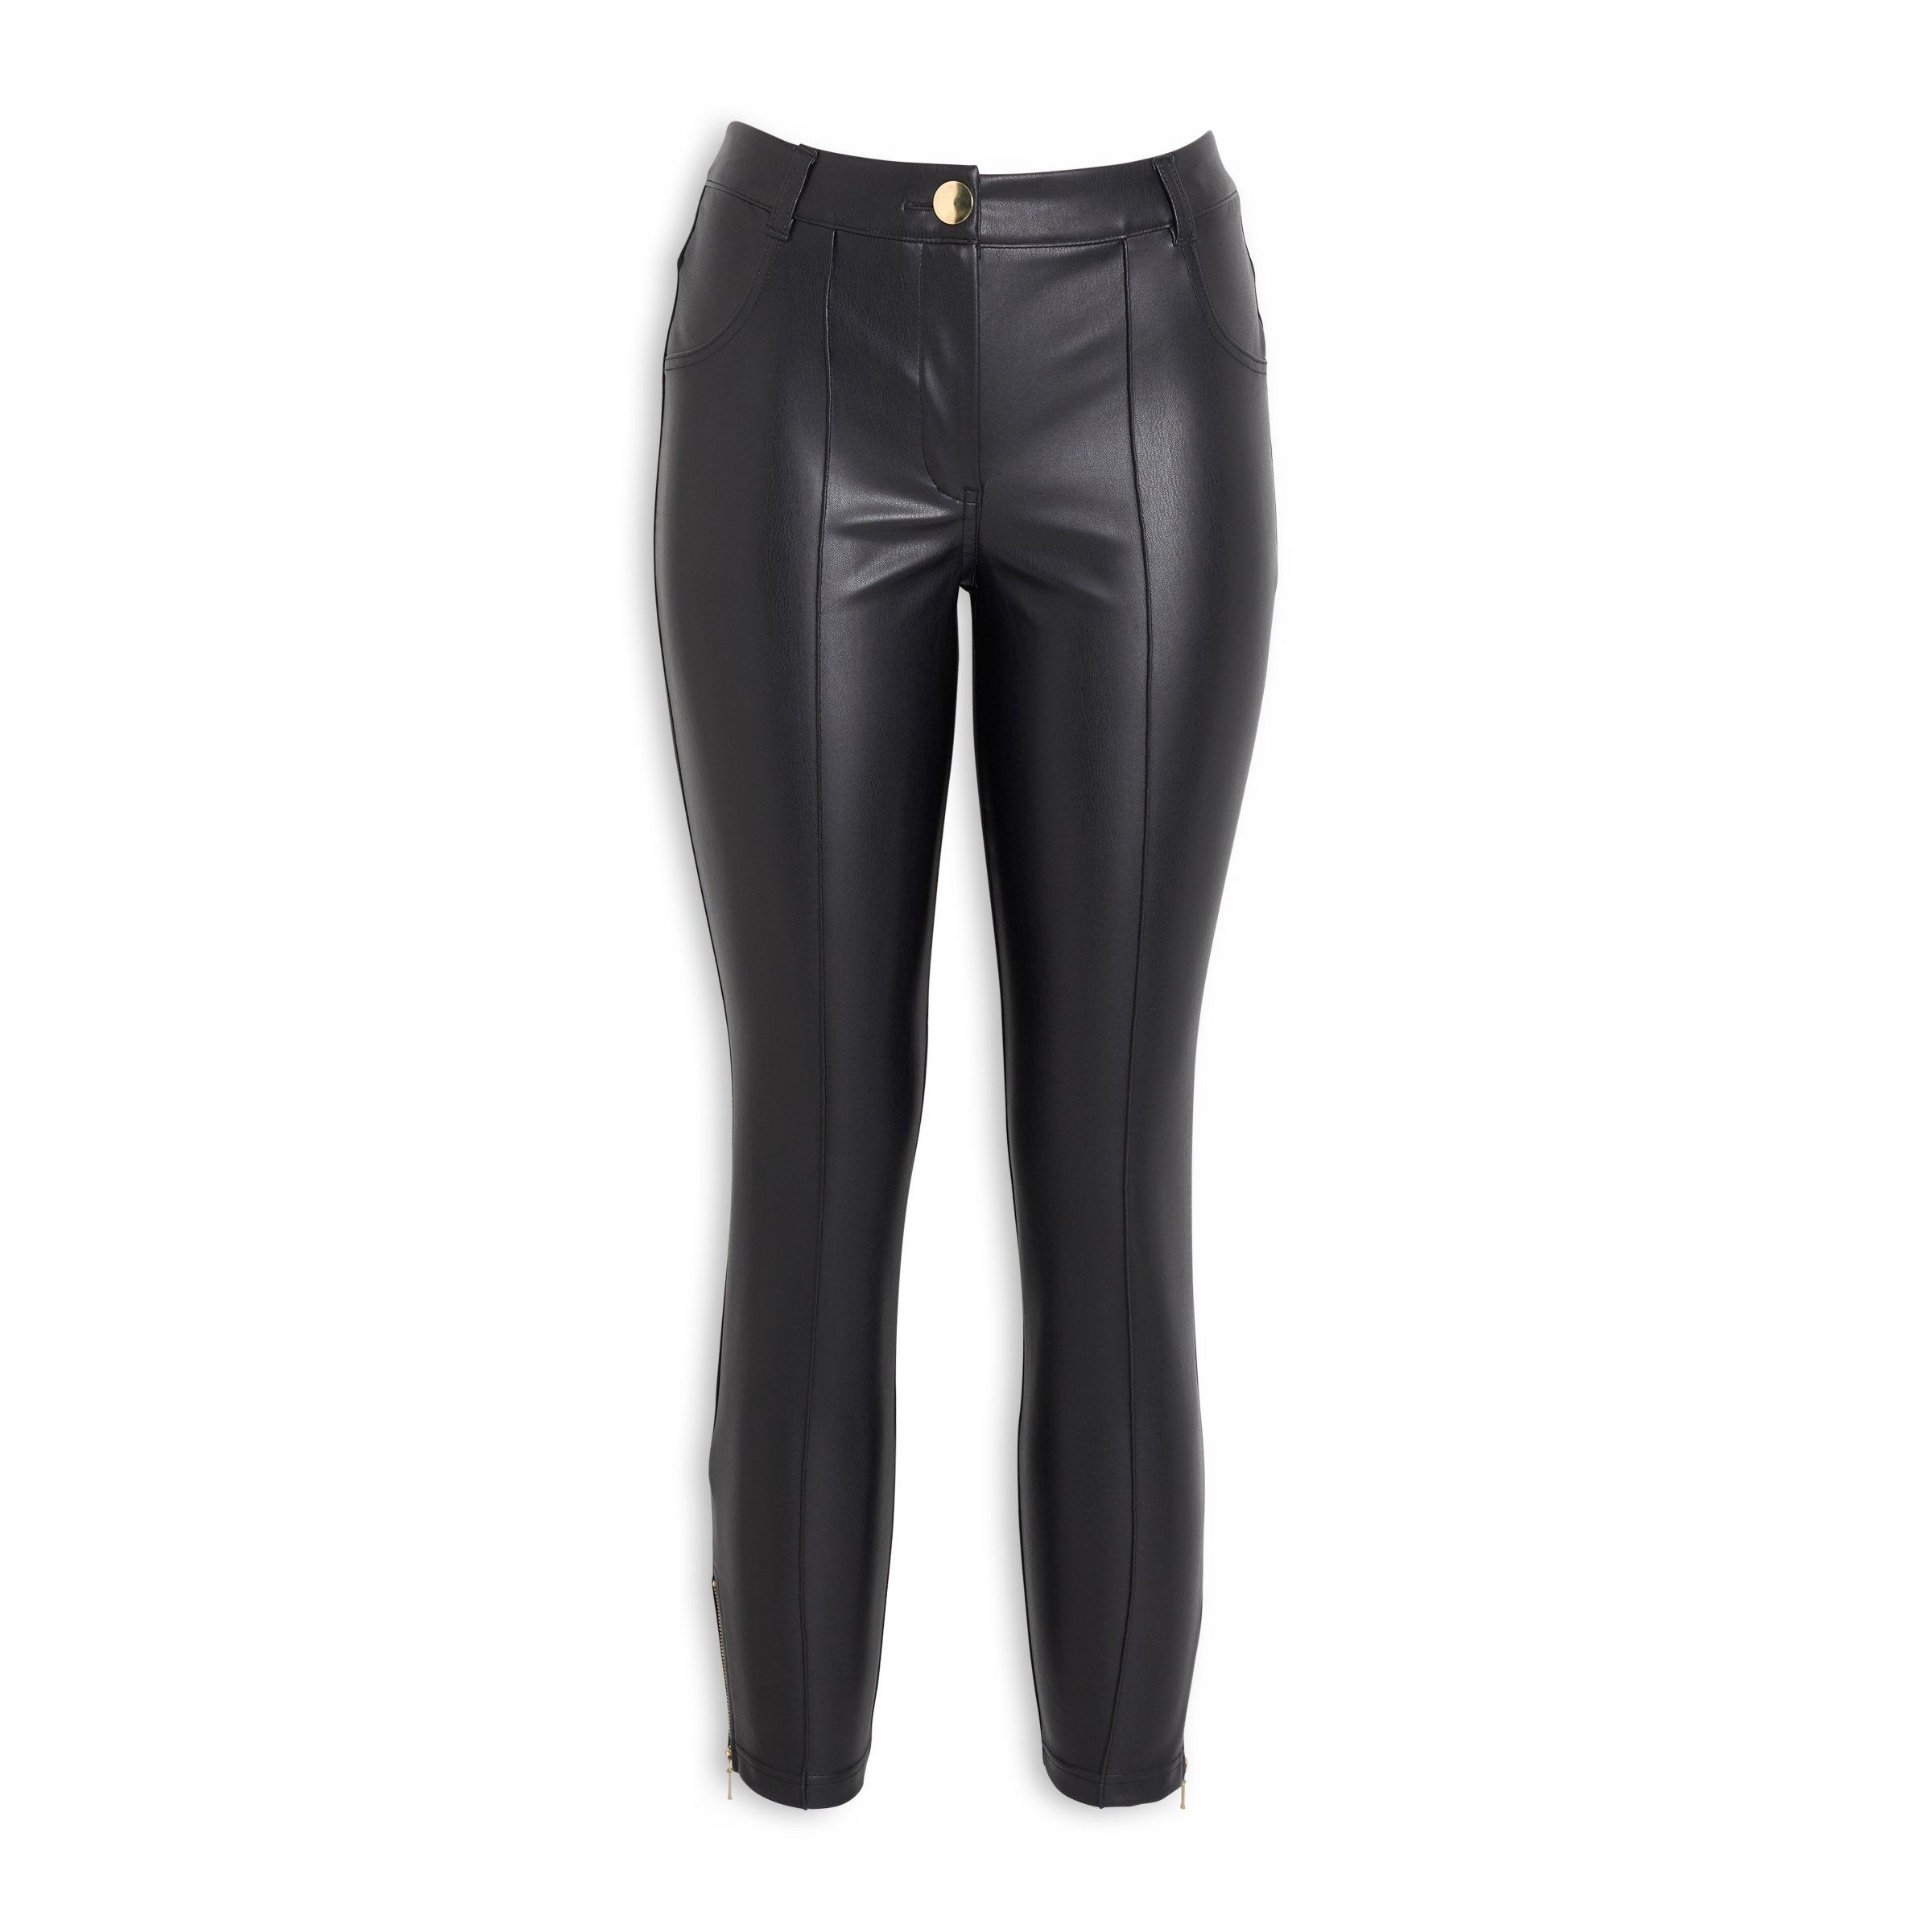 Buy Truworths Collection Leather Look Skinny Pants Online | Truworths